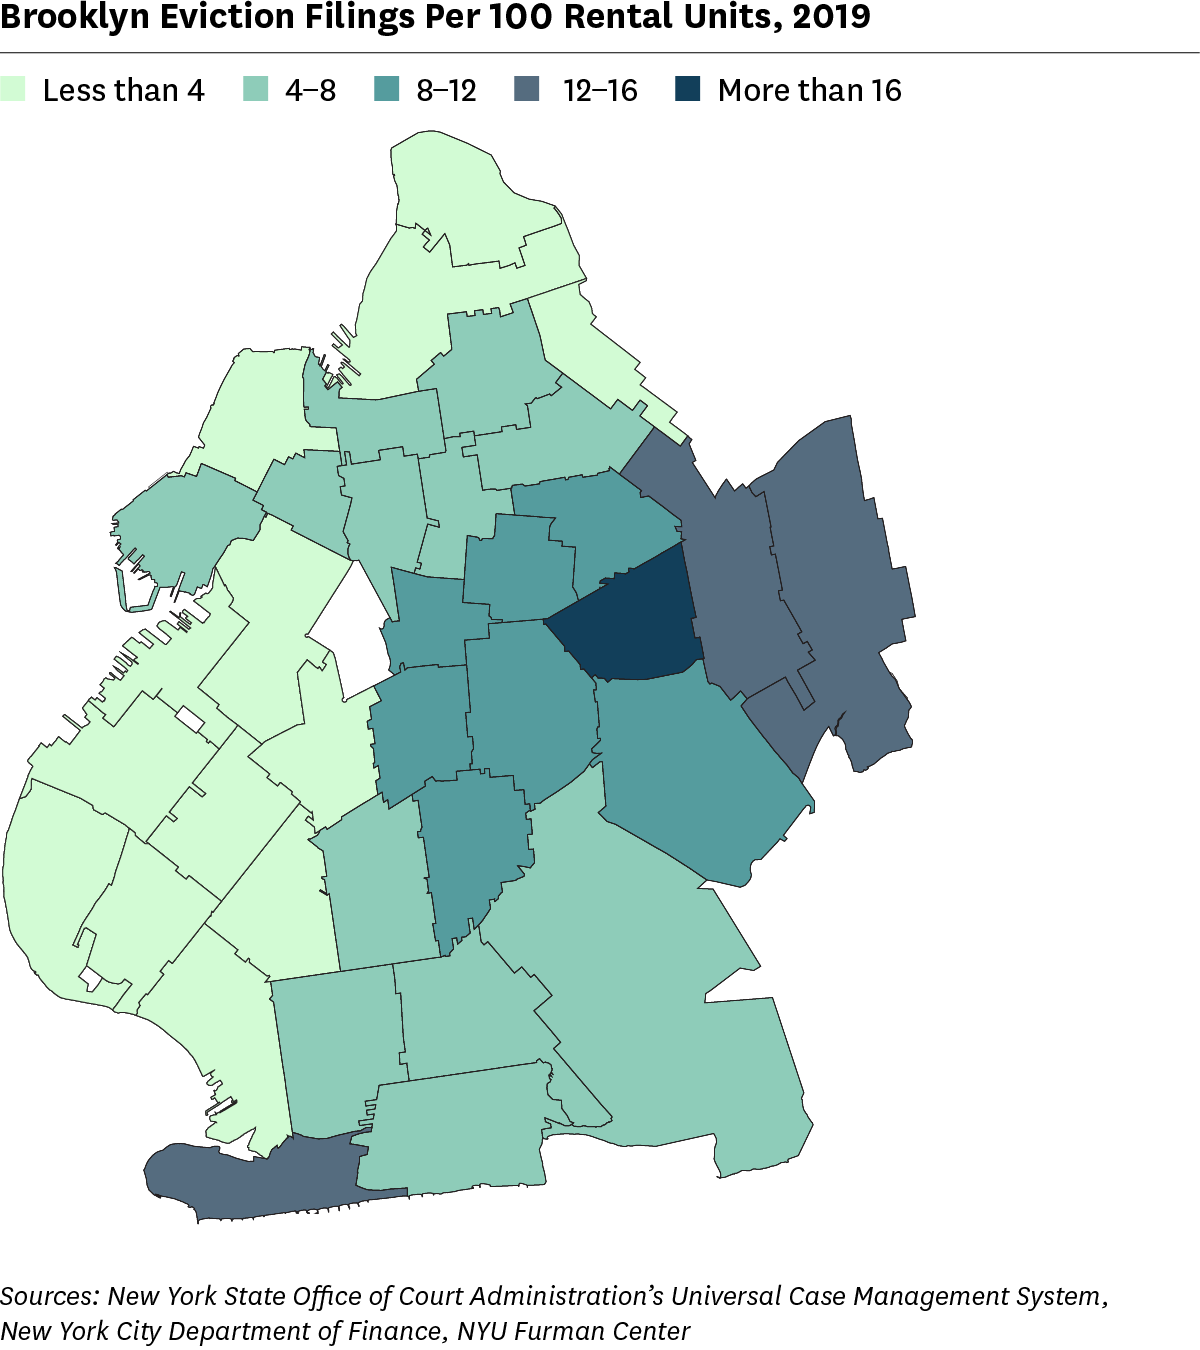 Map showing 2019 eviction filing rates for ZIP Code areas in Brooklyn